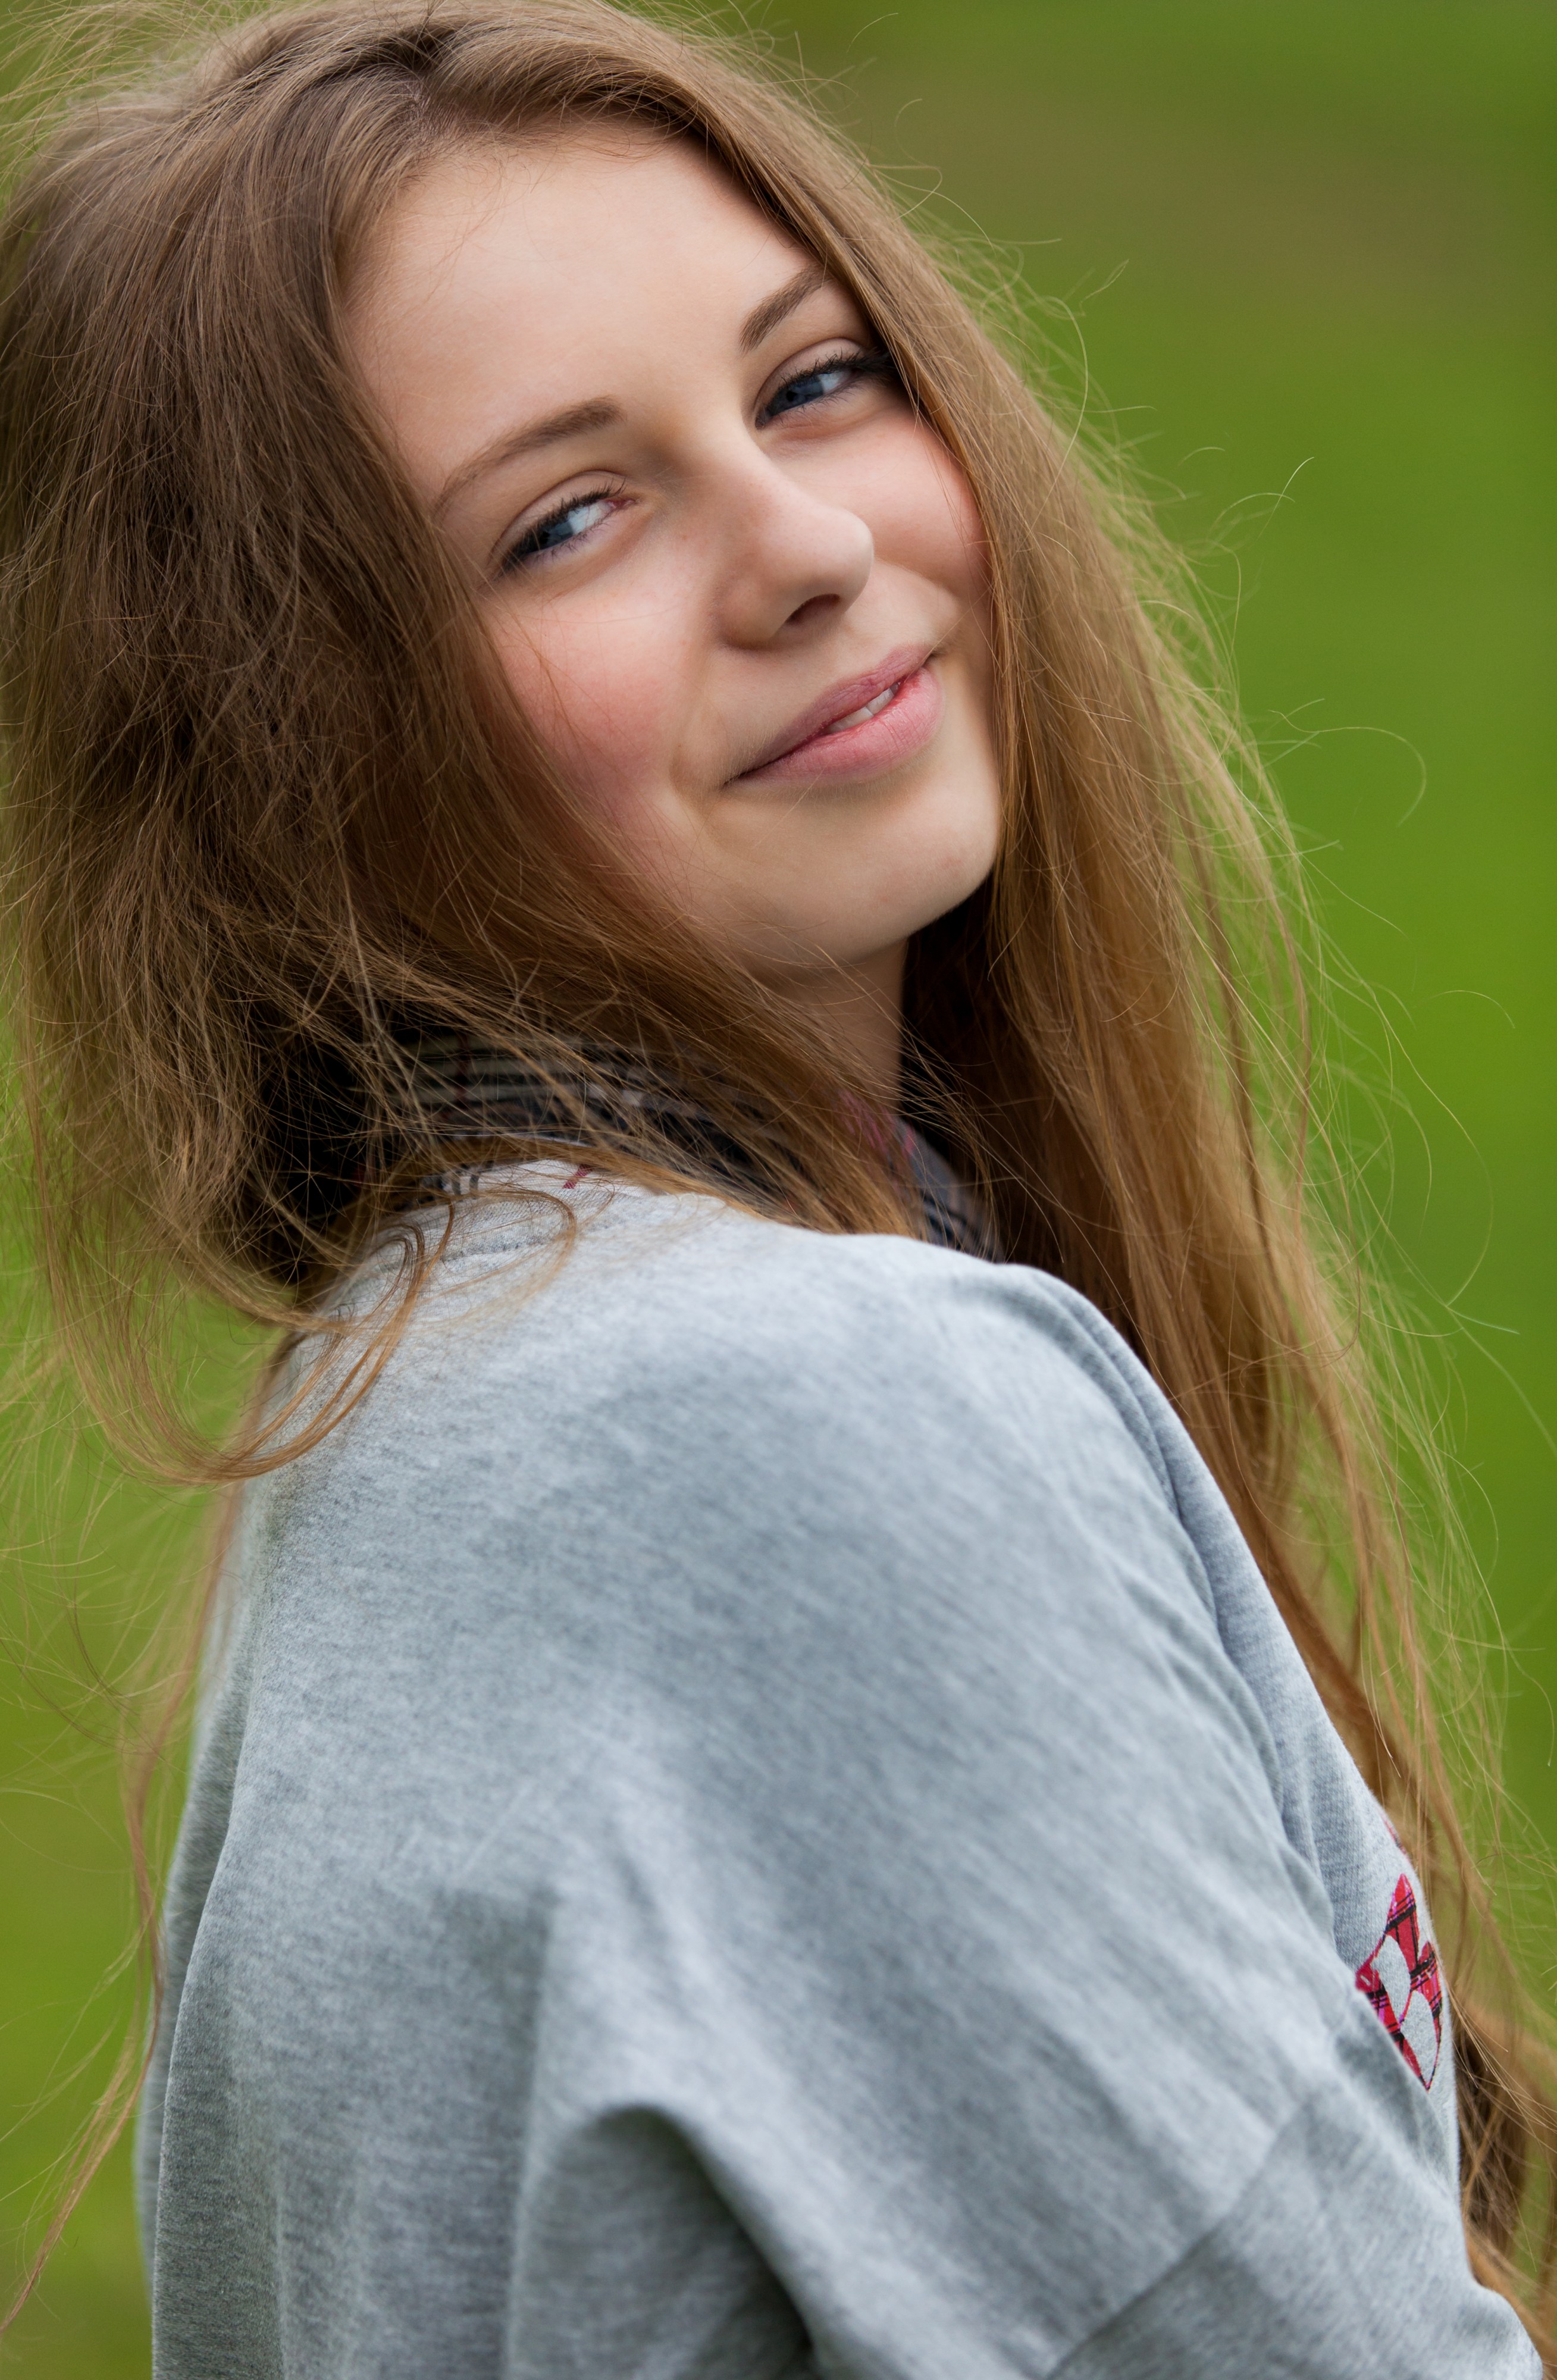 a 15 year-old Catholic girl photographed in May 2015, picture 9